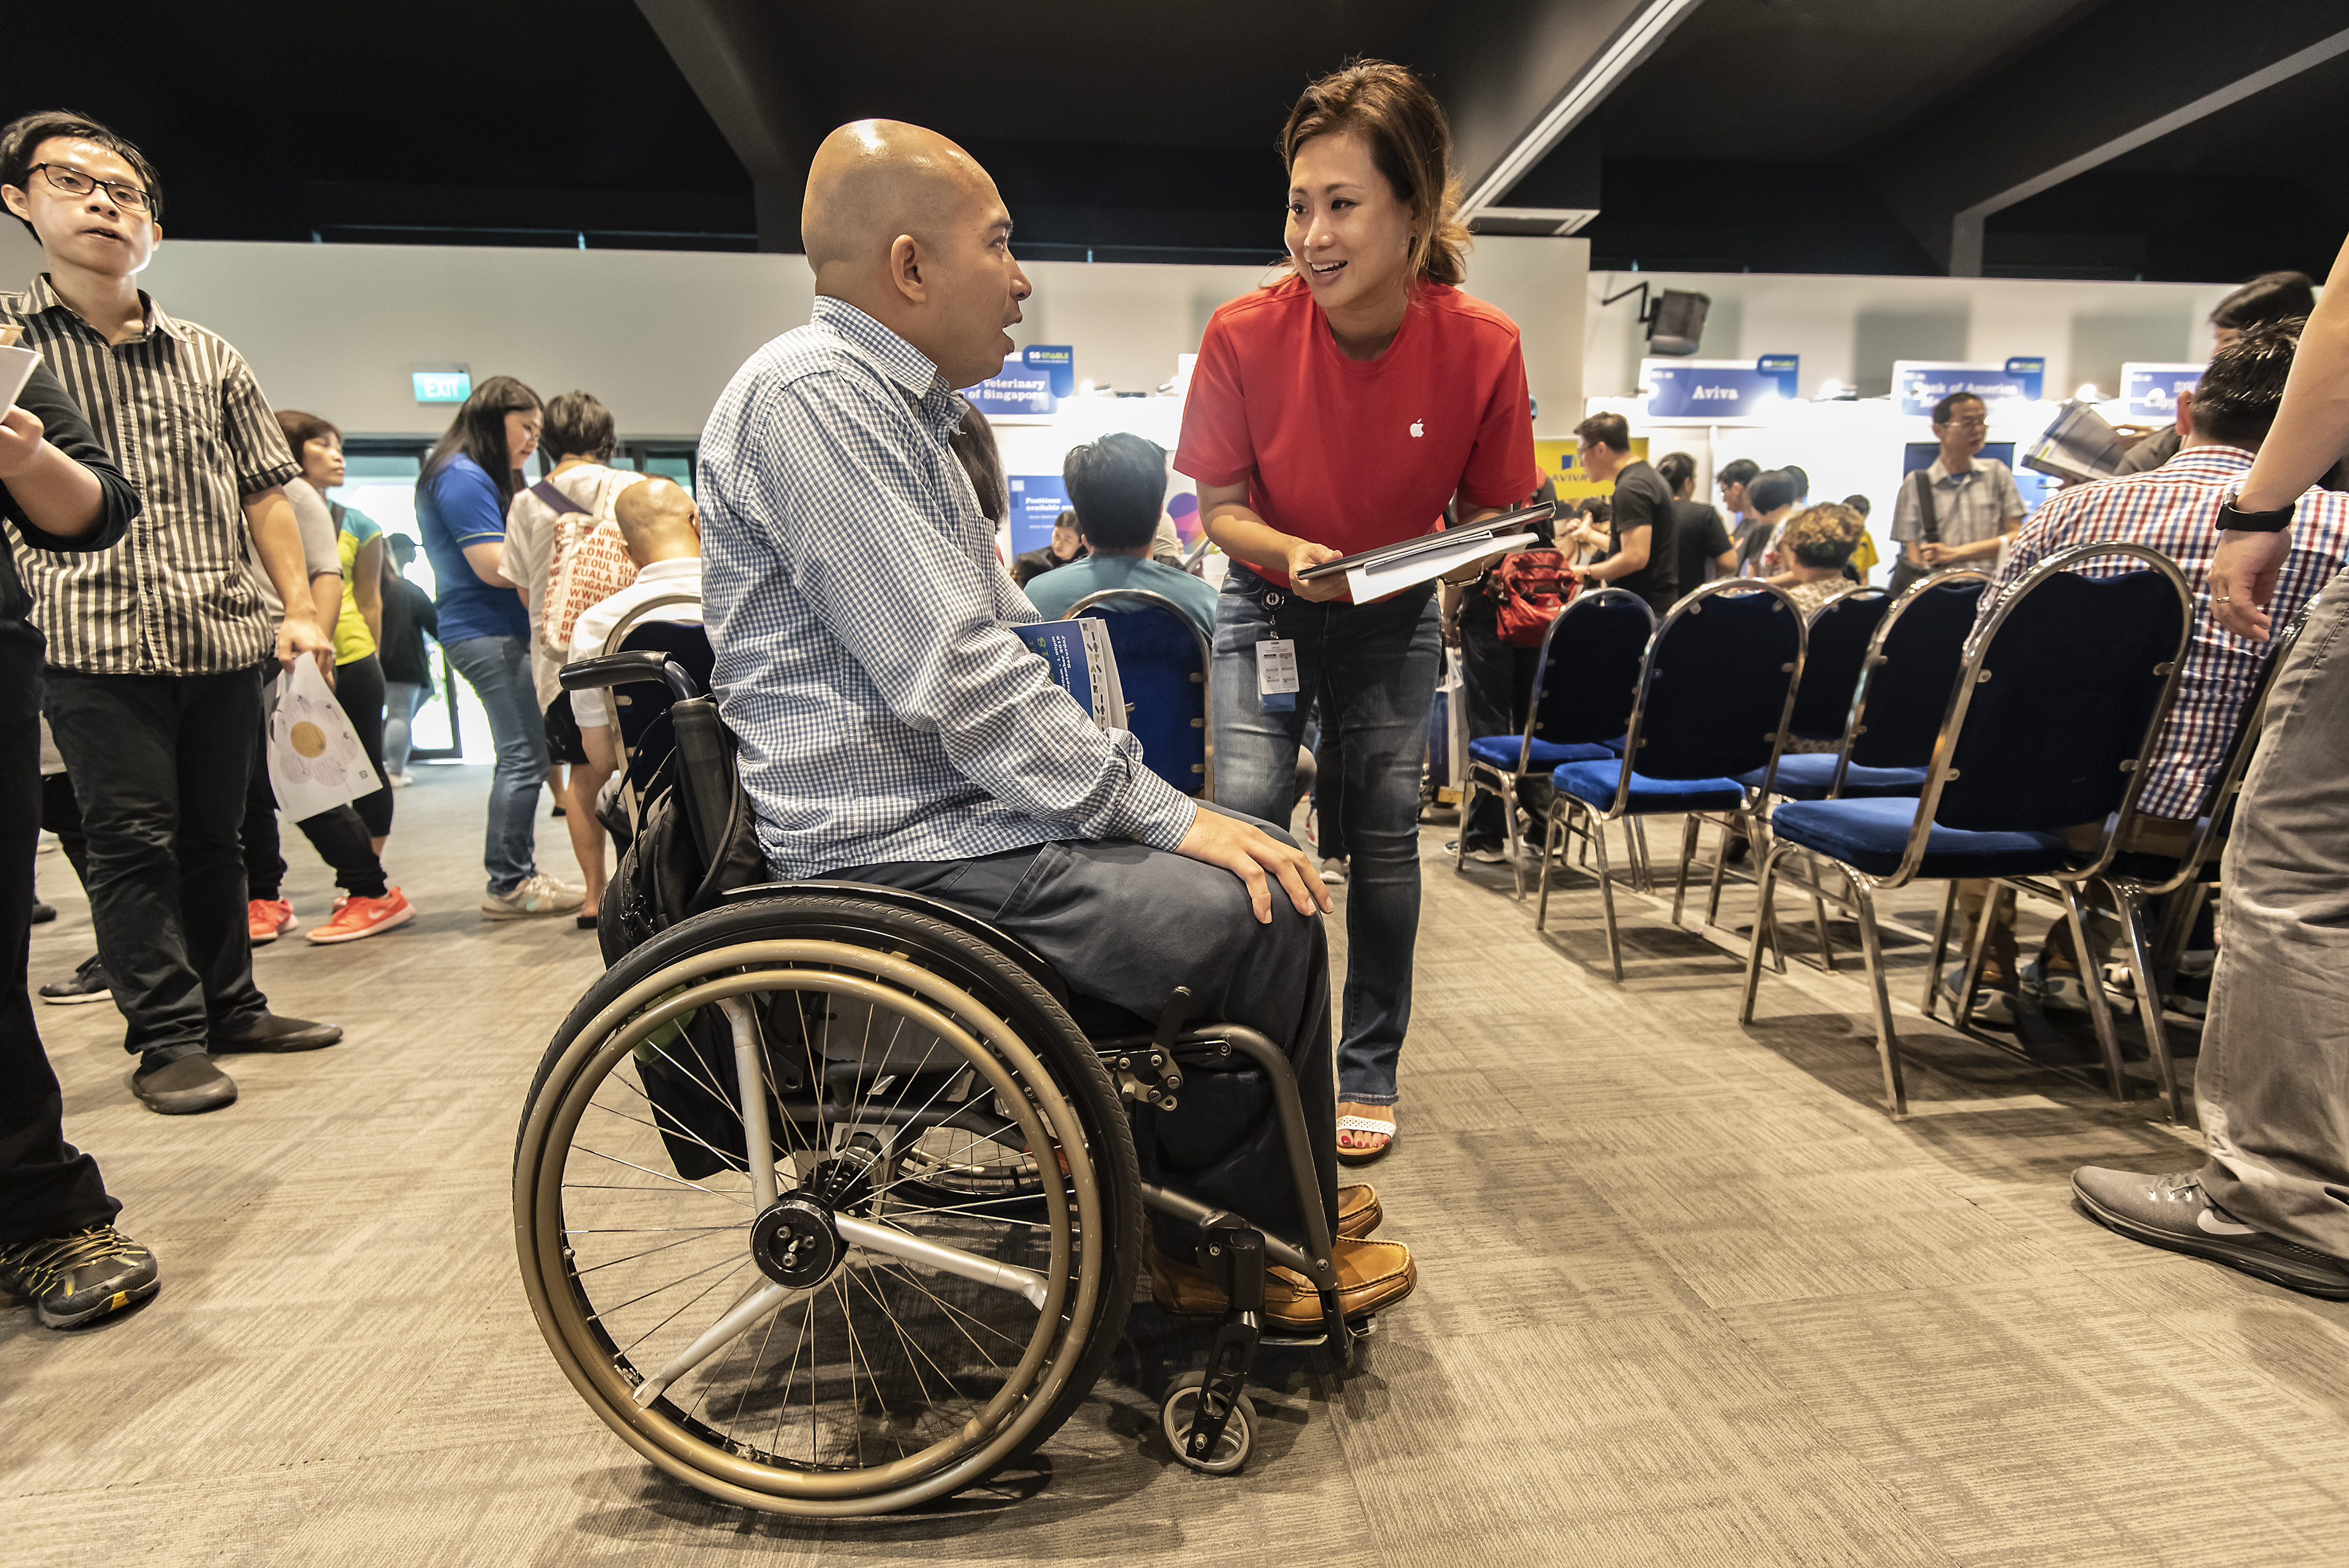 Lady with red blouse and jeans talking to man on wheelchair at a training and career fair.